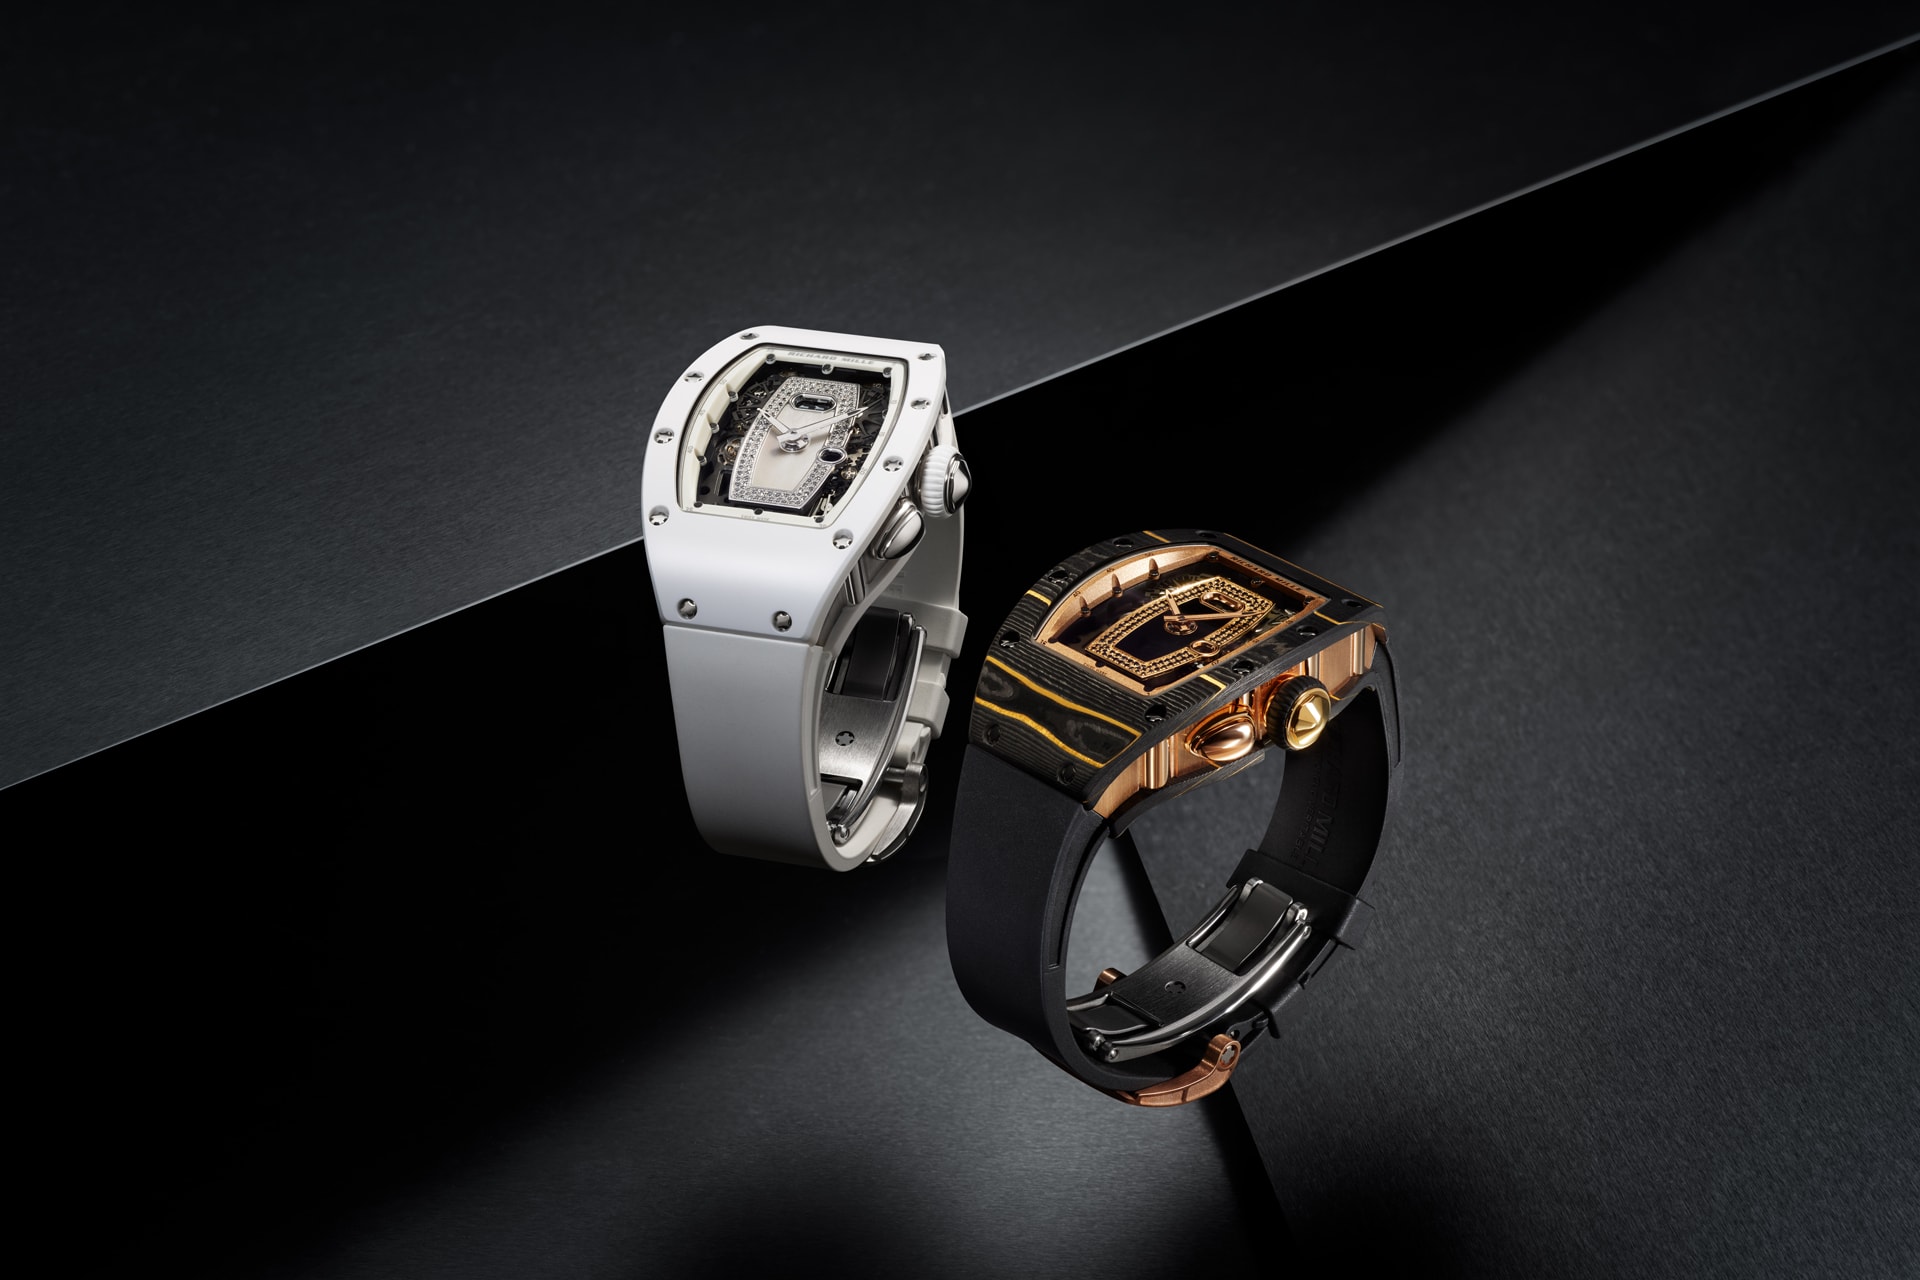 richard mille rm 037 watches ceramic carbon tpt gold caliber automatic winding crma1 ladies onyx diamond mother of pearl